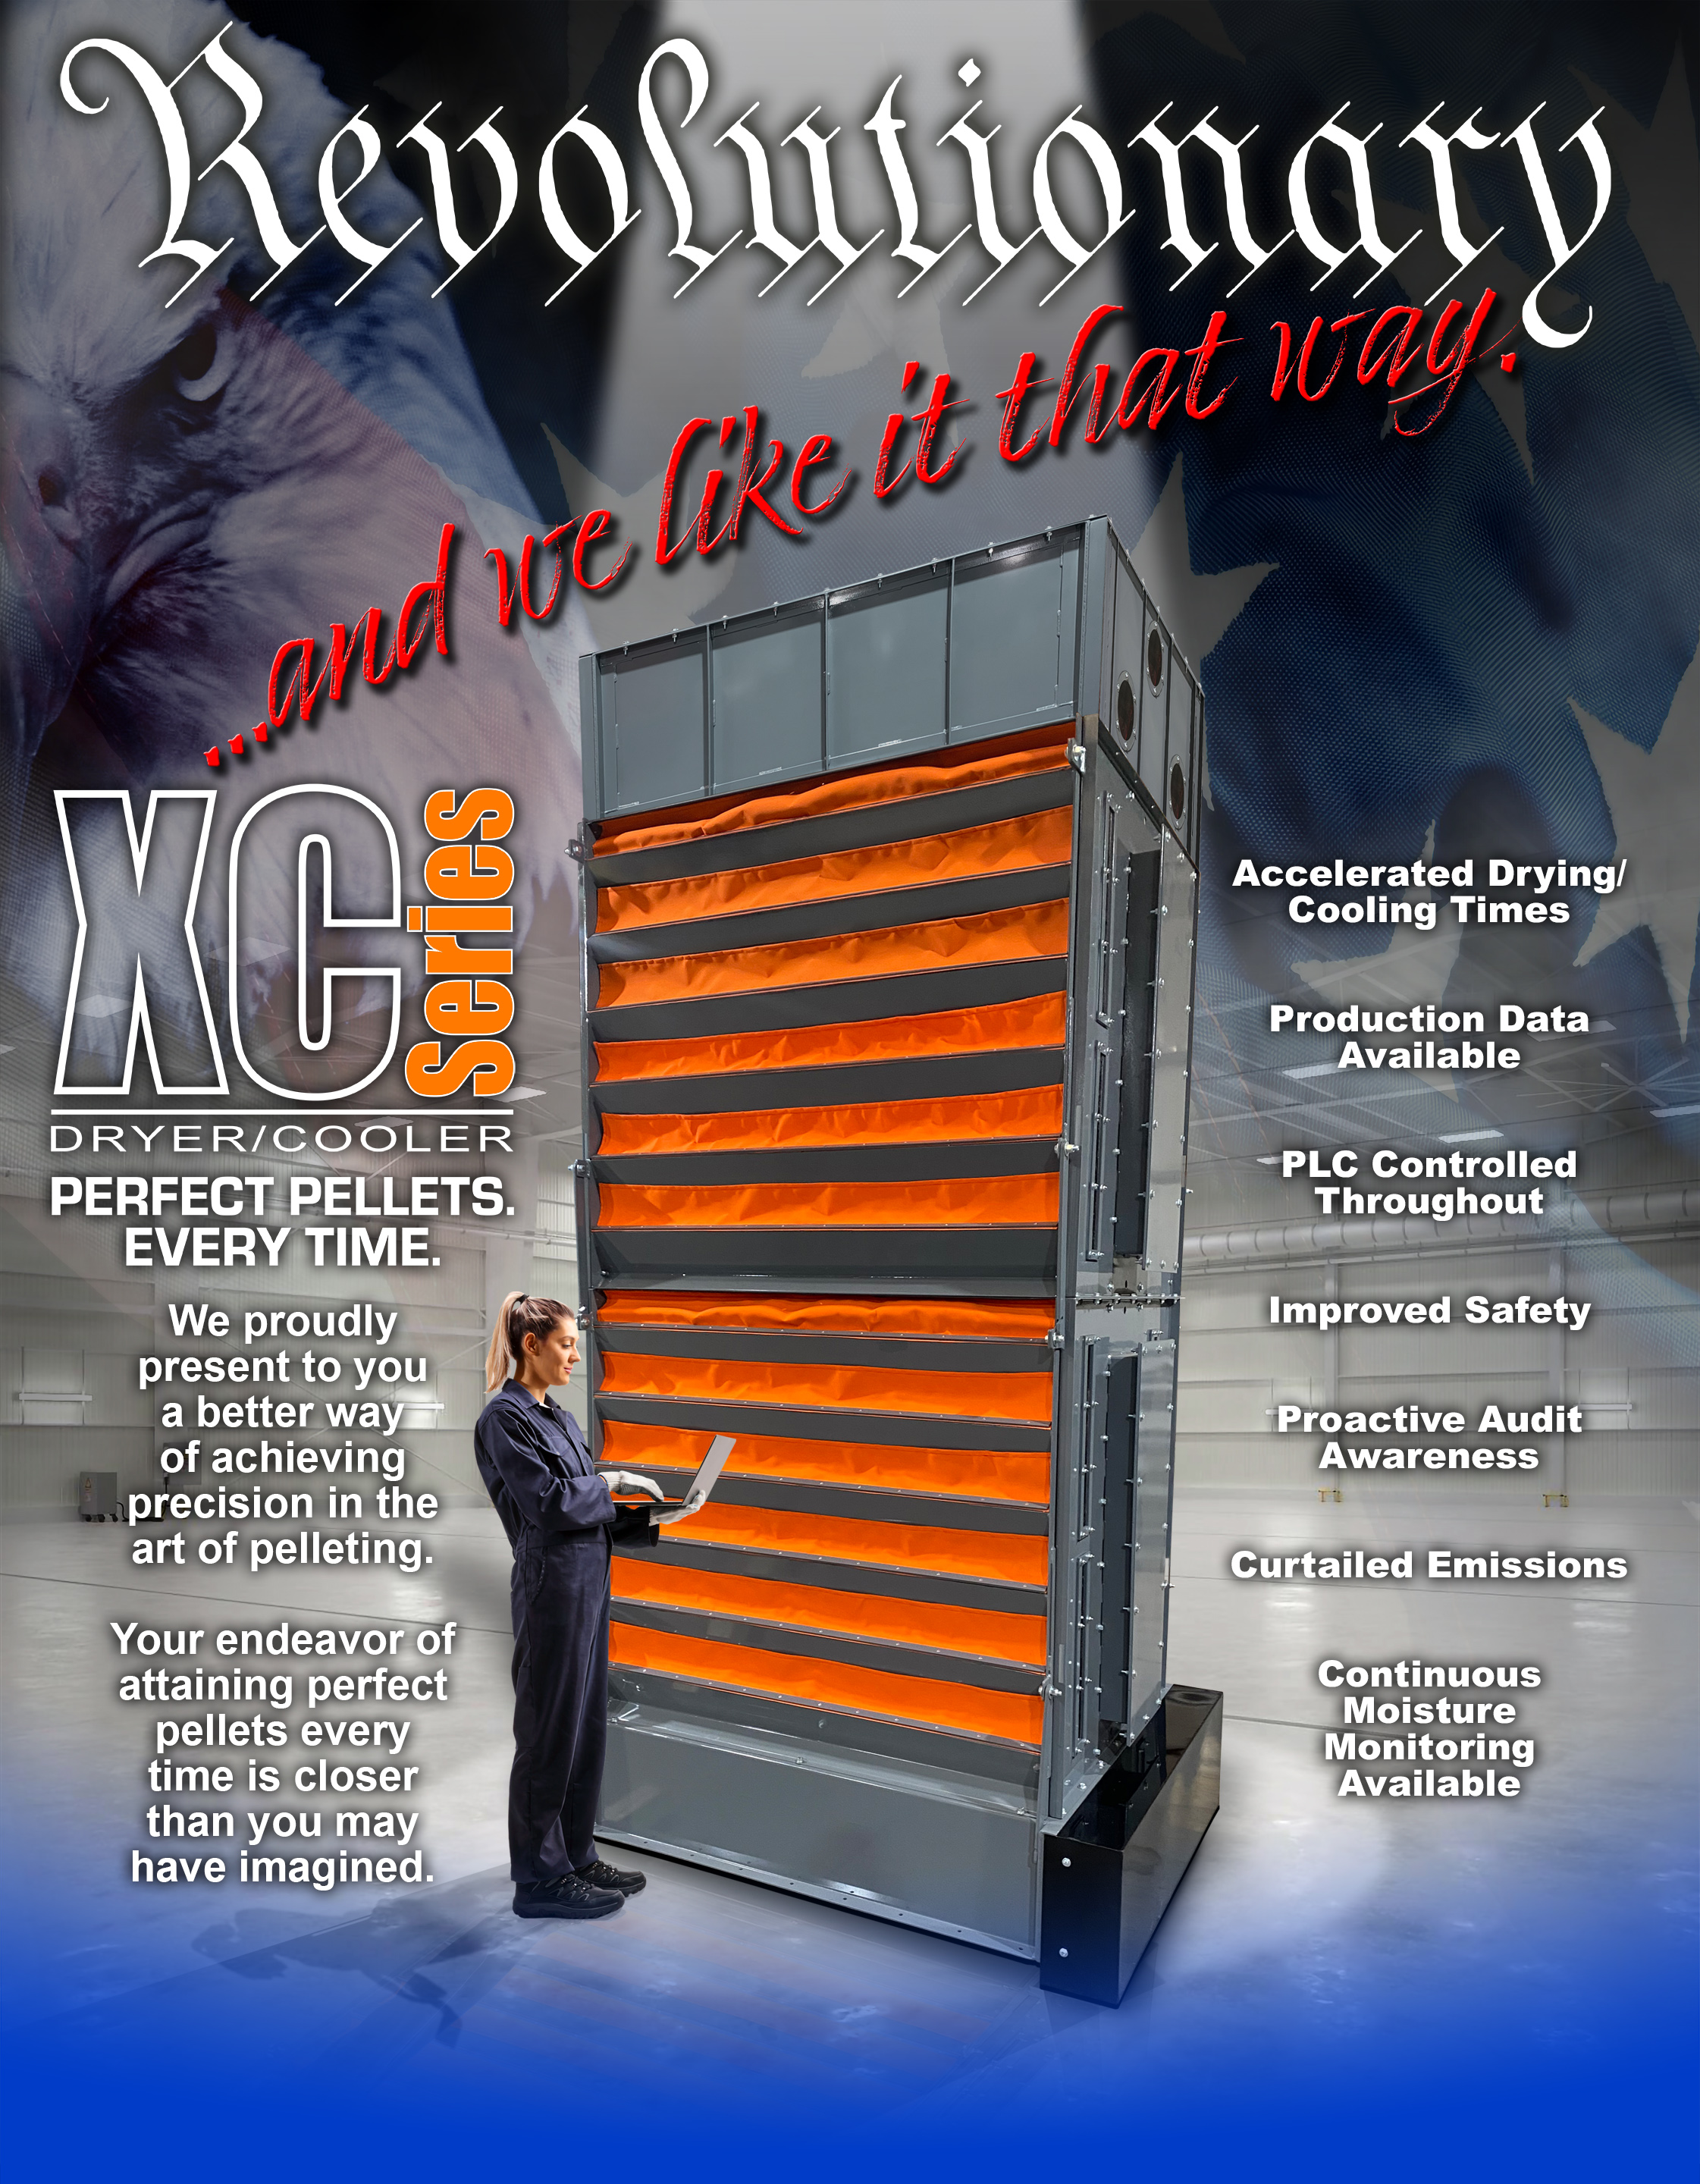 Your Most Trusted Partner in Industrial Dehydration - REVOLUTIONARY - XC Series Dryer/Coolers from MCS